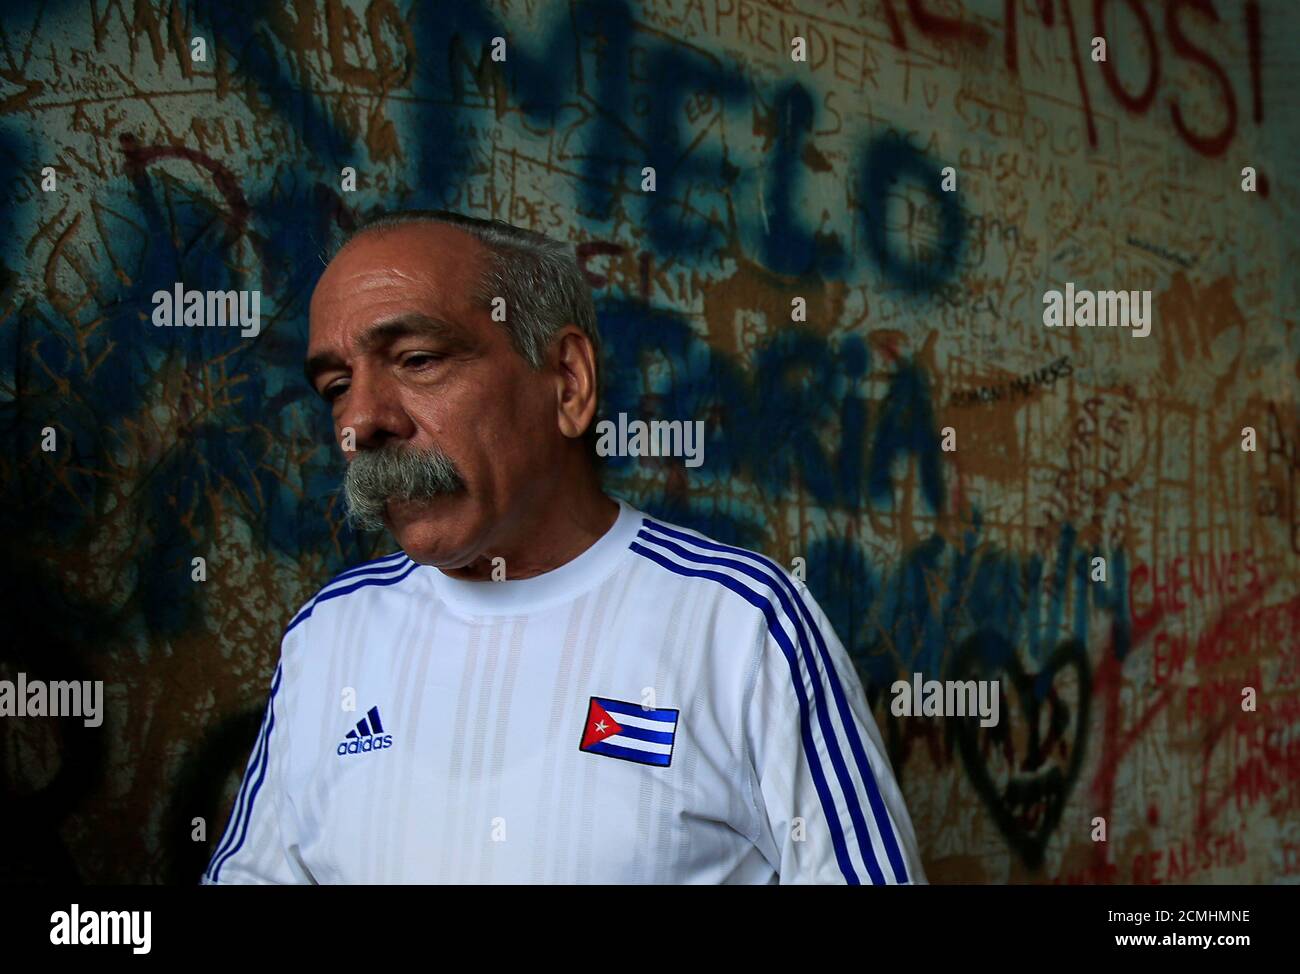 Jorge Gonzales, a Cuban doctor who found the remains of Ernesto "Che"  Guevara talks to the media during events to commemorate the 50th death  anniversary of Che Guevara, in Vallegrande, Santa Cruz,